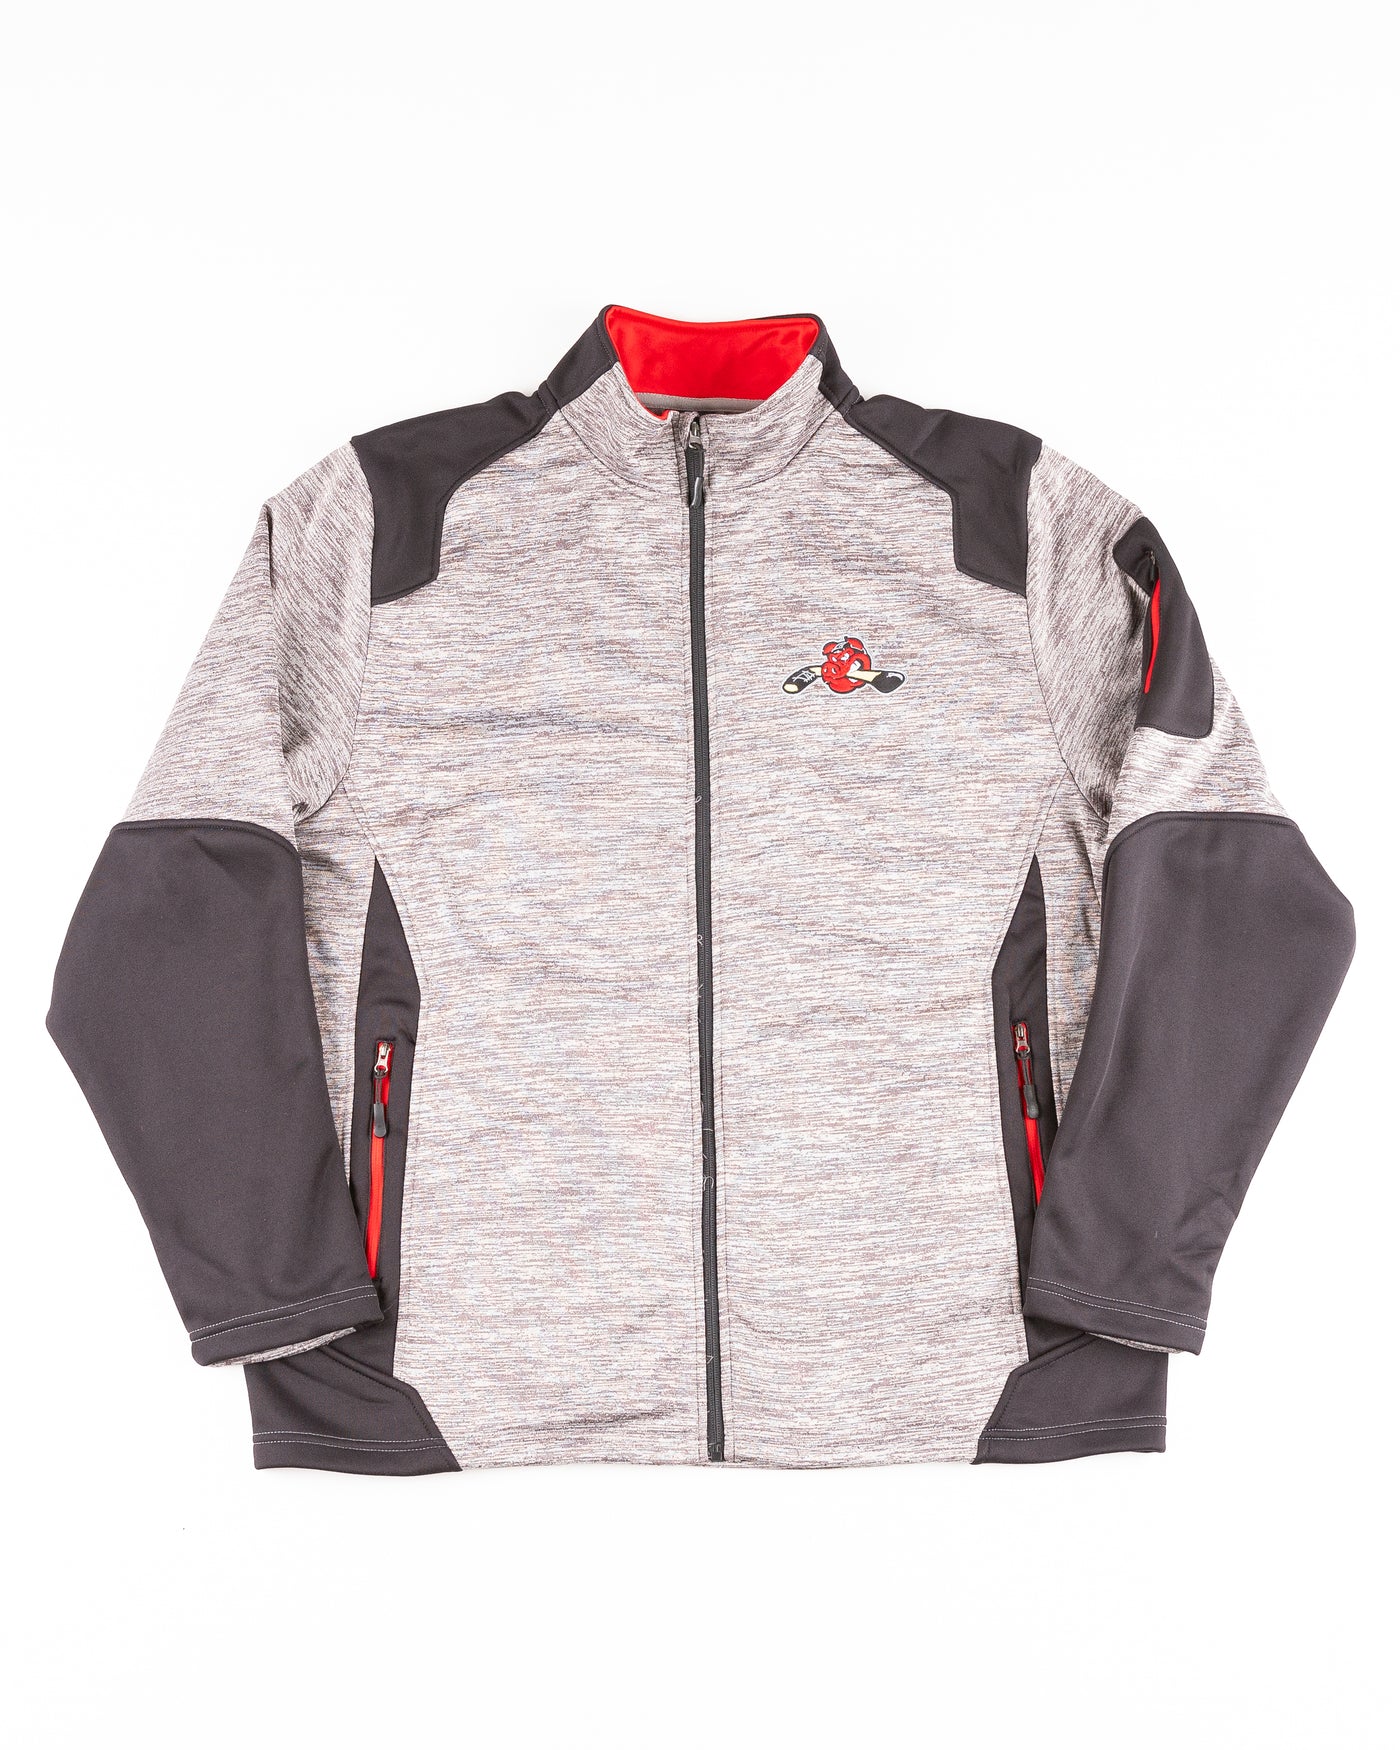 grey, black and red Colosseum full zip with Hammy embroidered on left chest - front lay flat